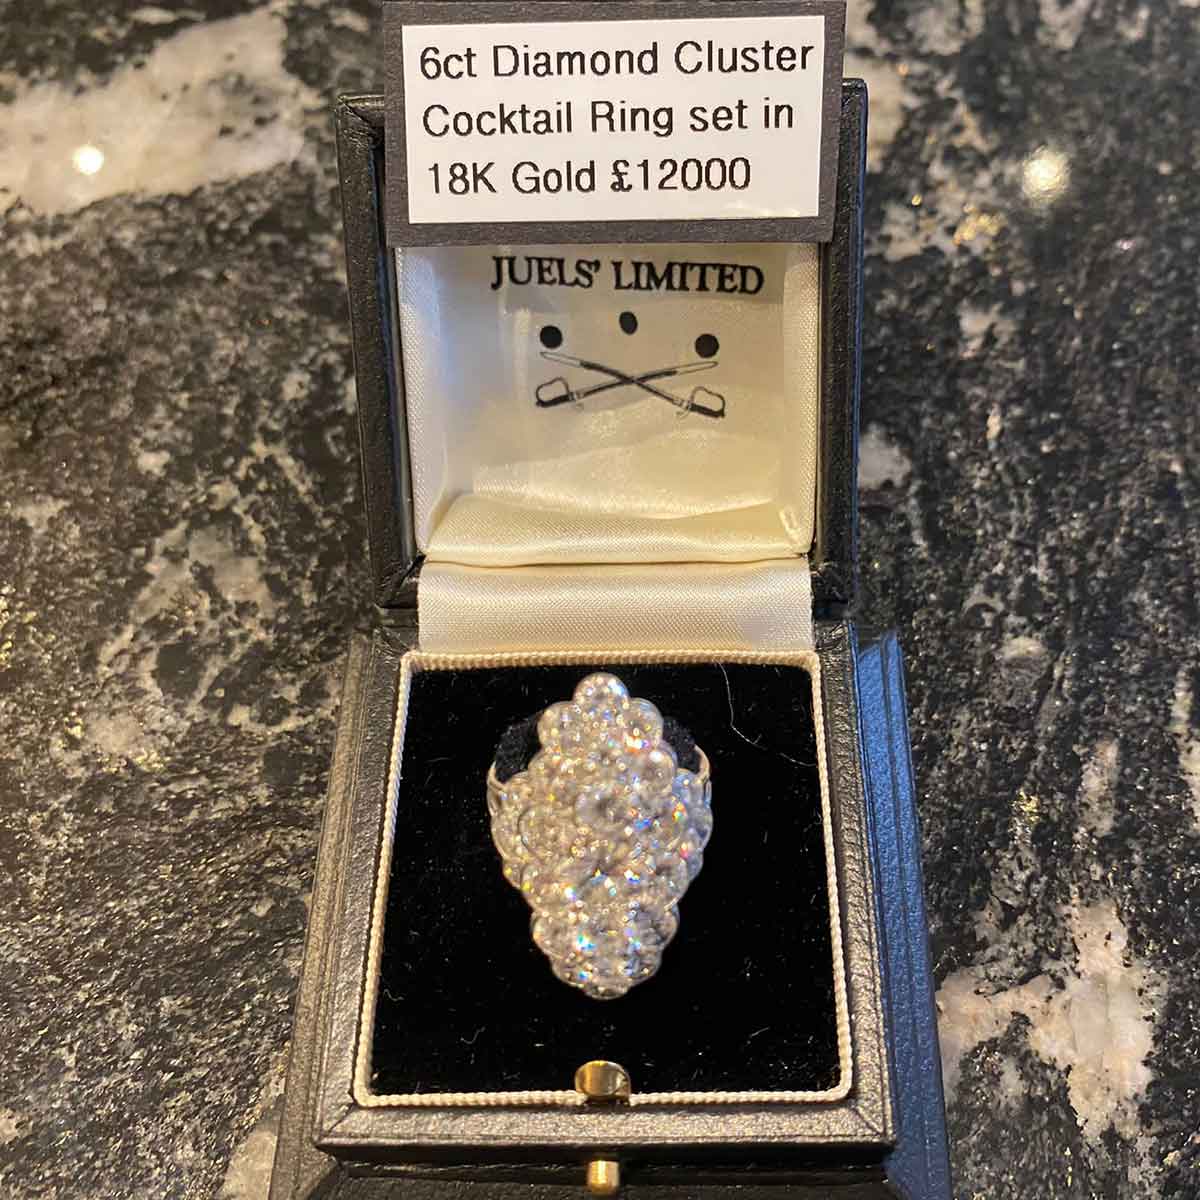 Juels Limited Norfolk Diamond Cluster Cocktail Ring